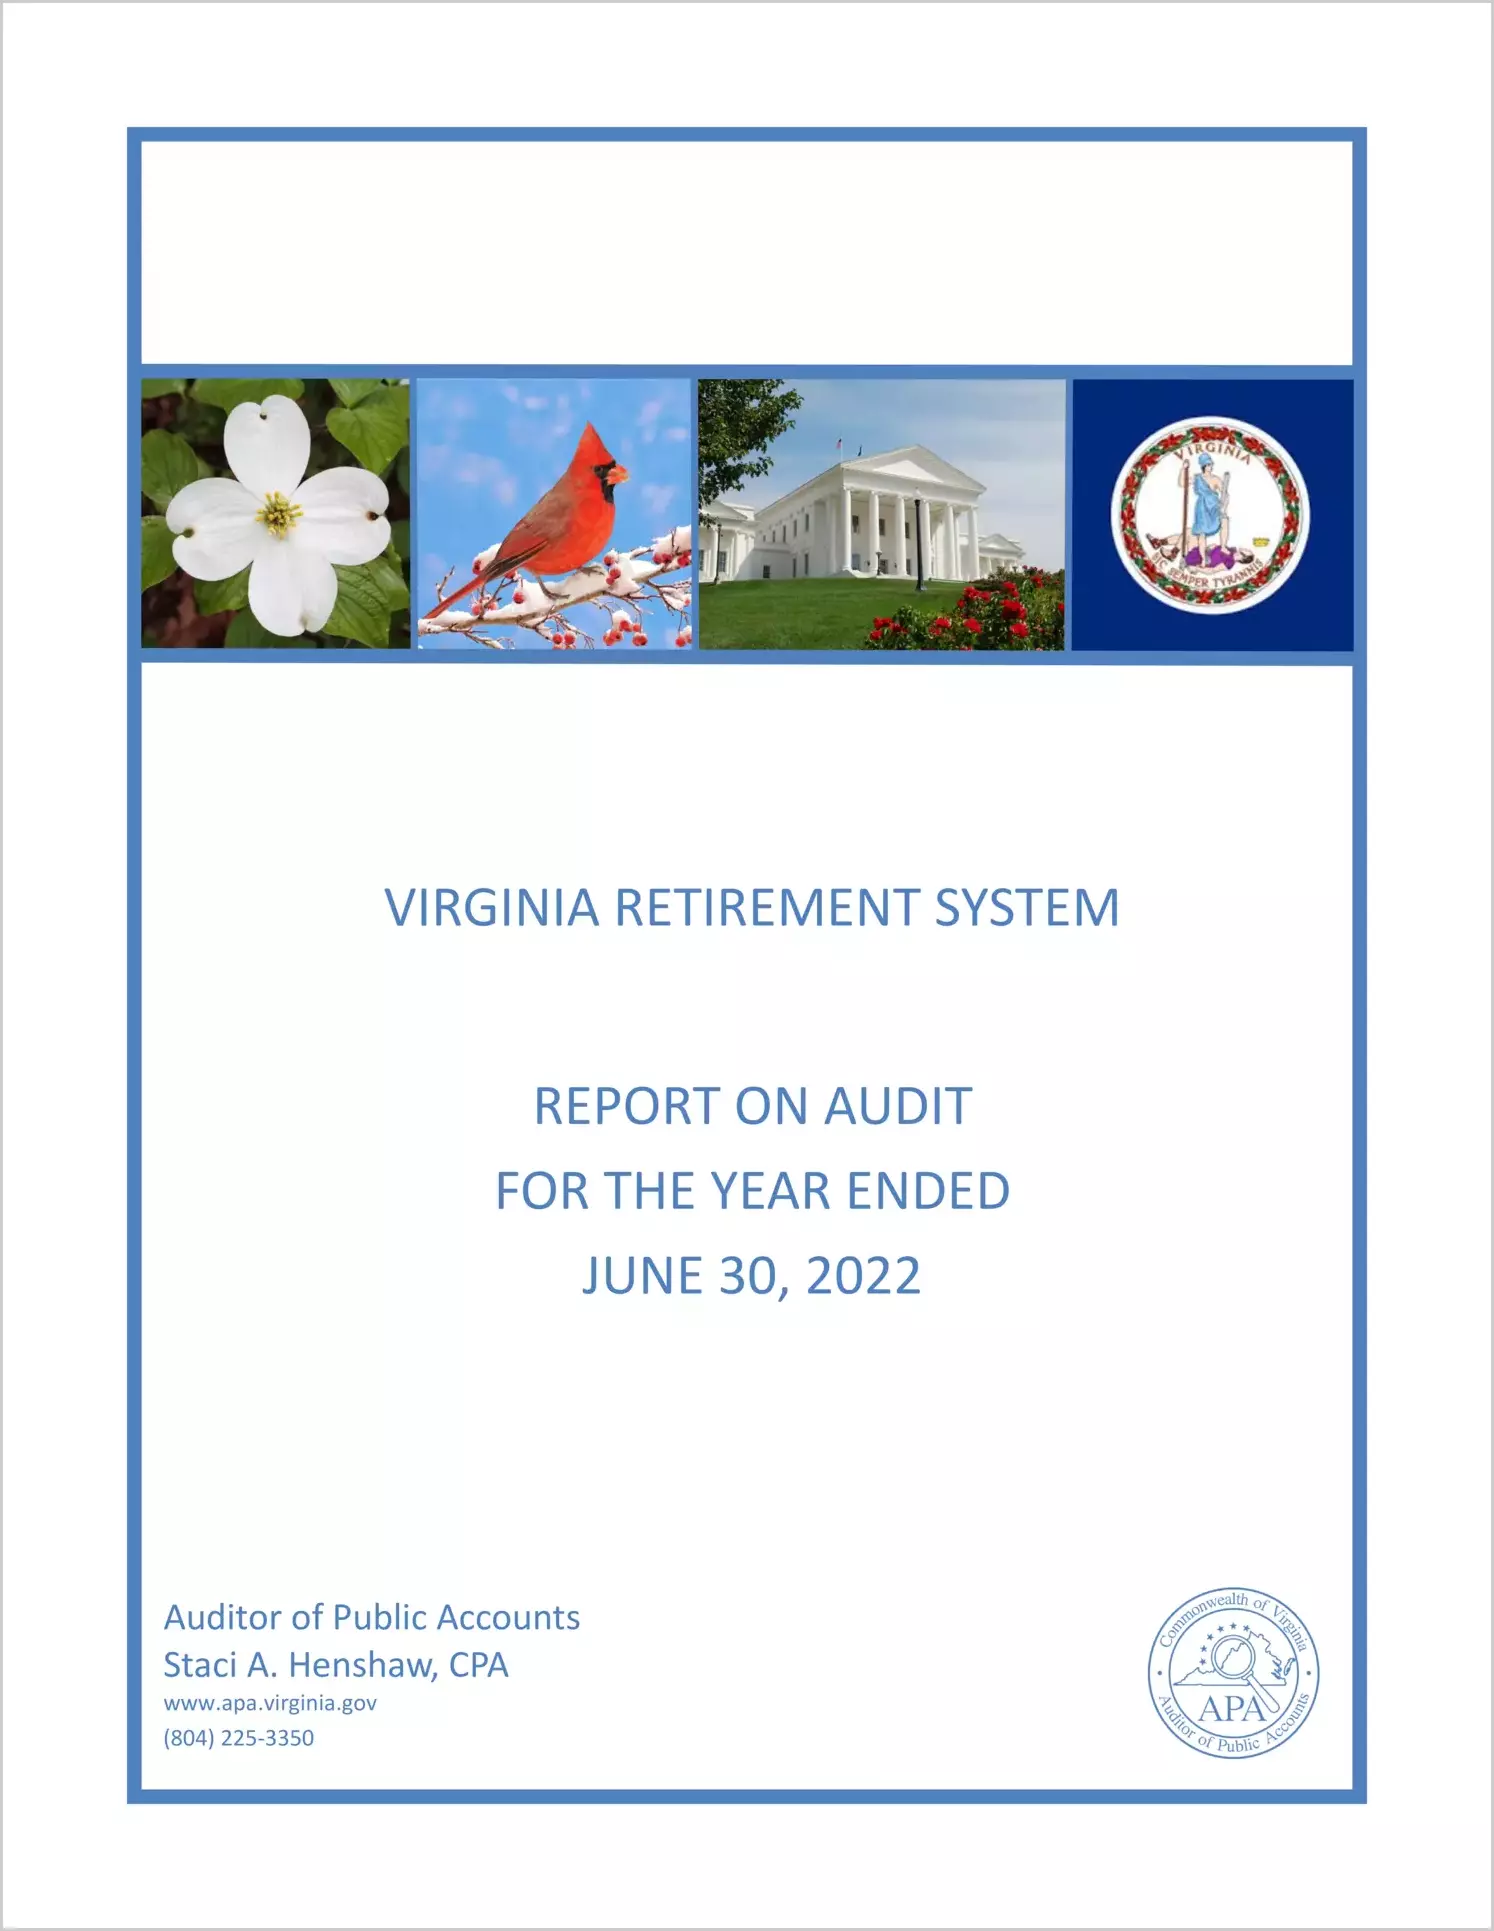 Virginia Retirement System for the year ended June 30, 2022